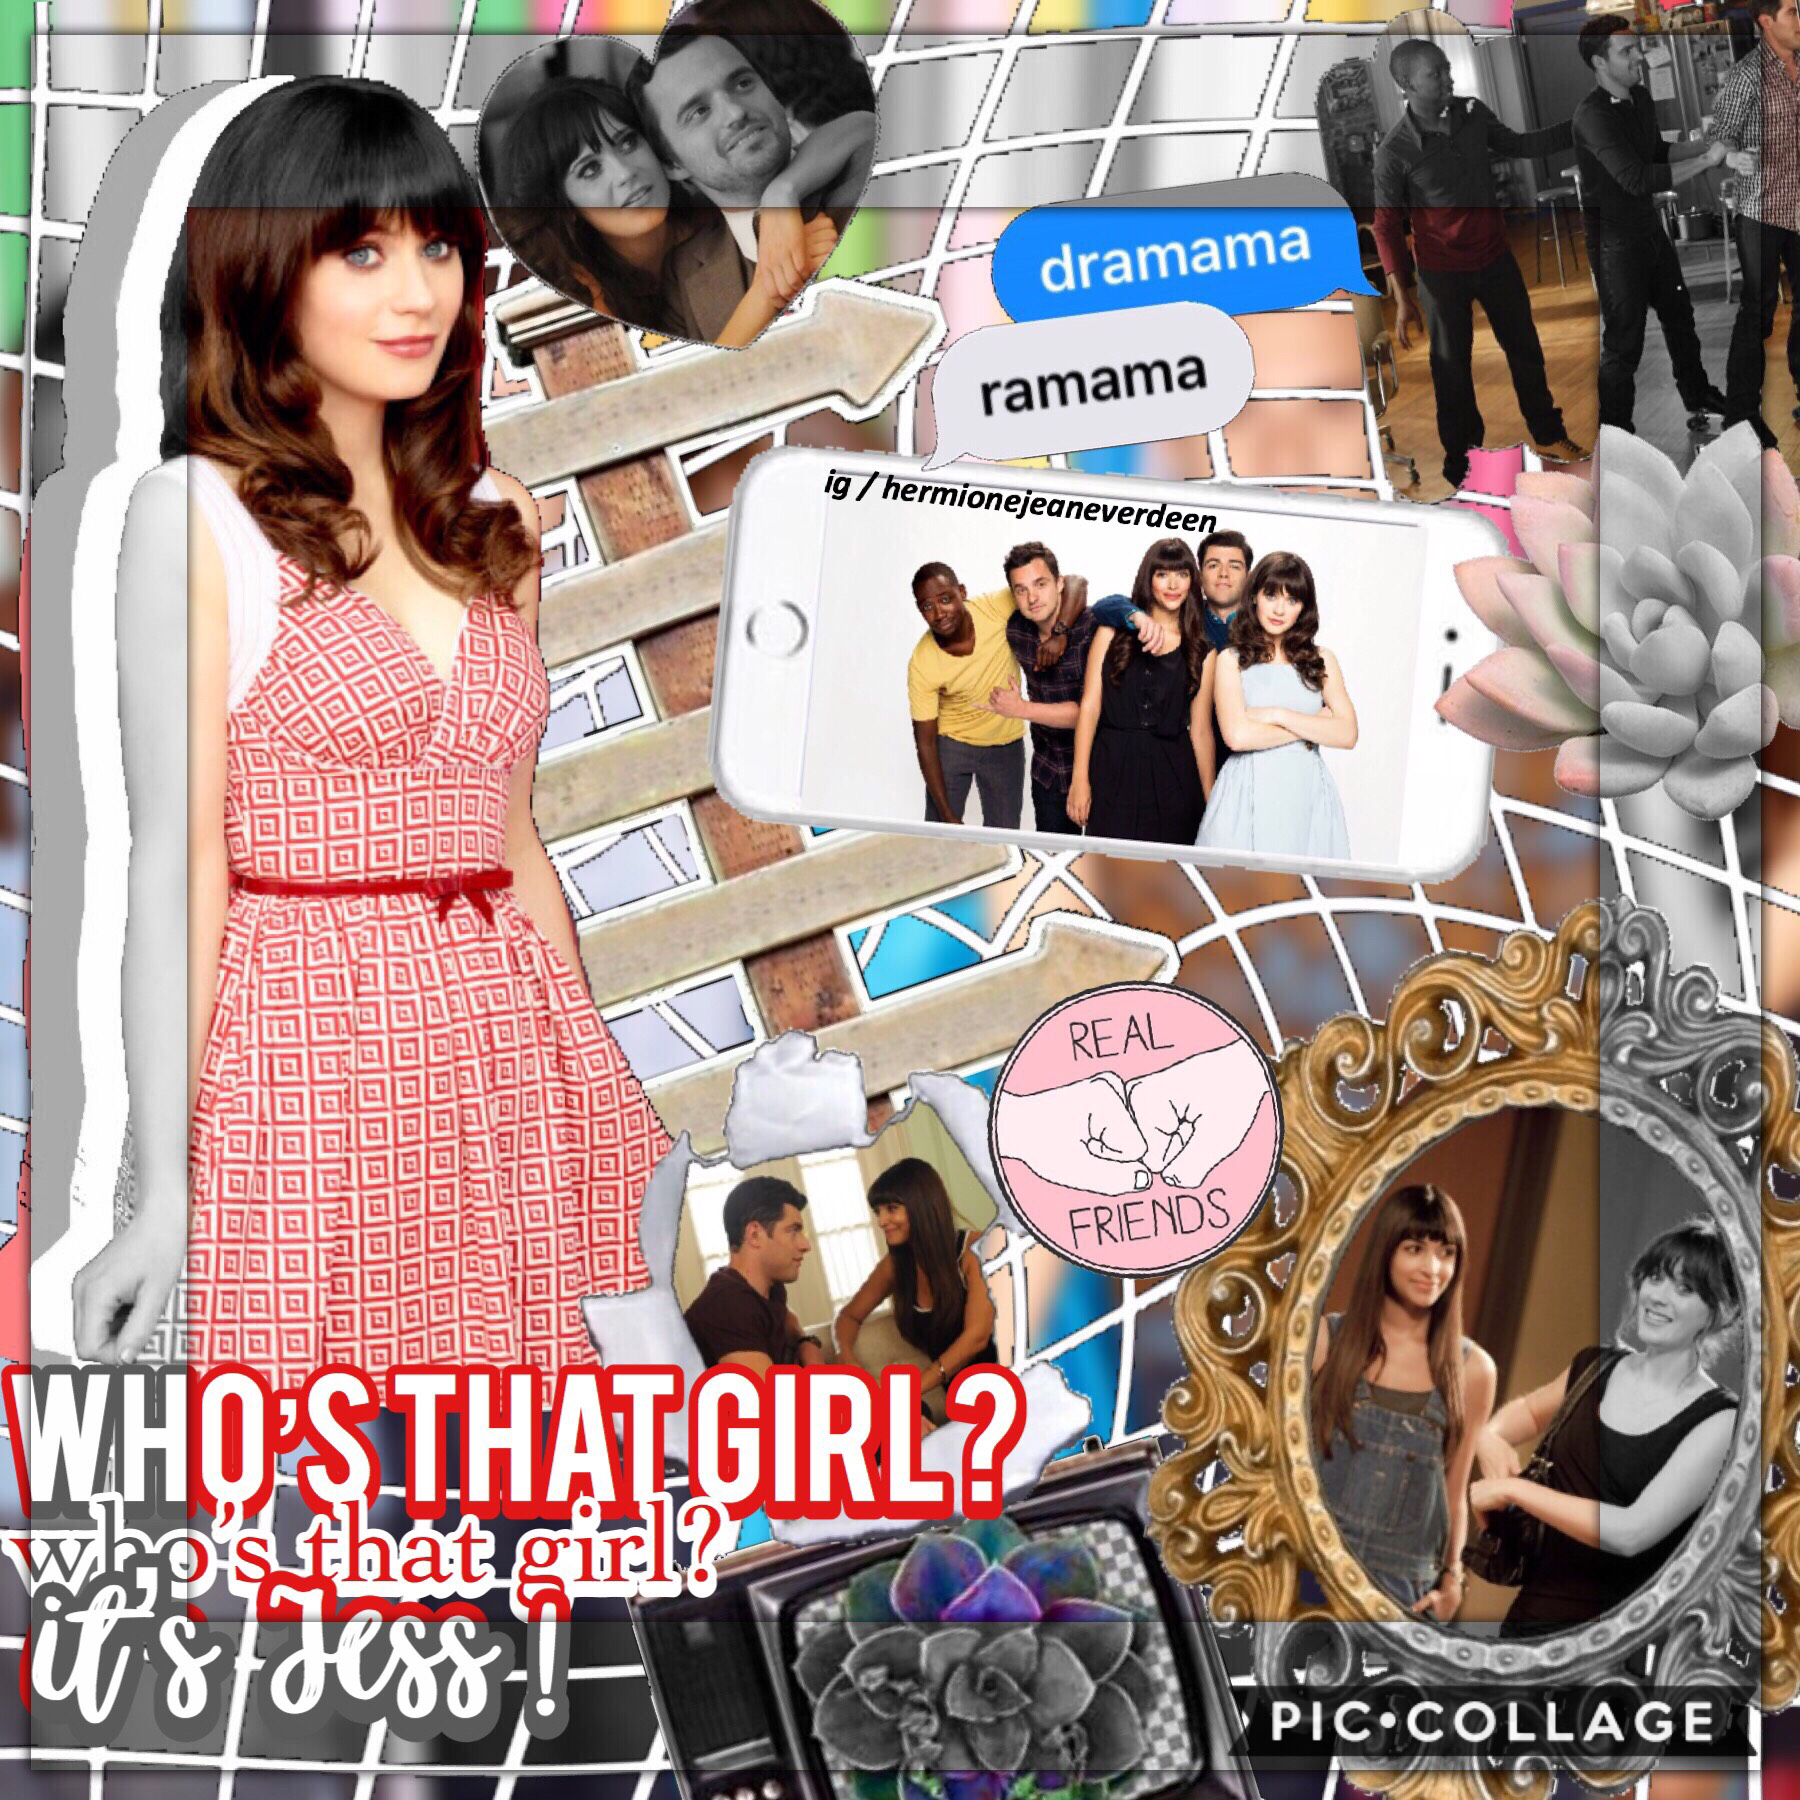 tap
my first New Girl edit! New Girl is a really funny show with a great storyline, I highly recommend it! there are 6 seasons on Netflix and the second half of the 6th season is airing soon(I think) 